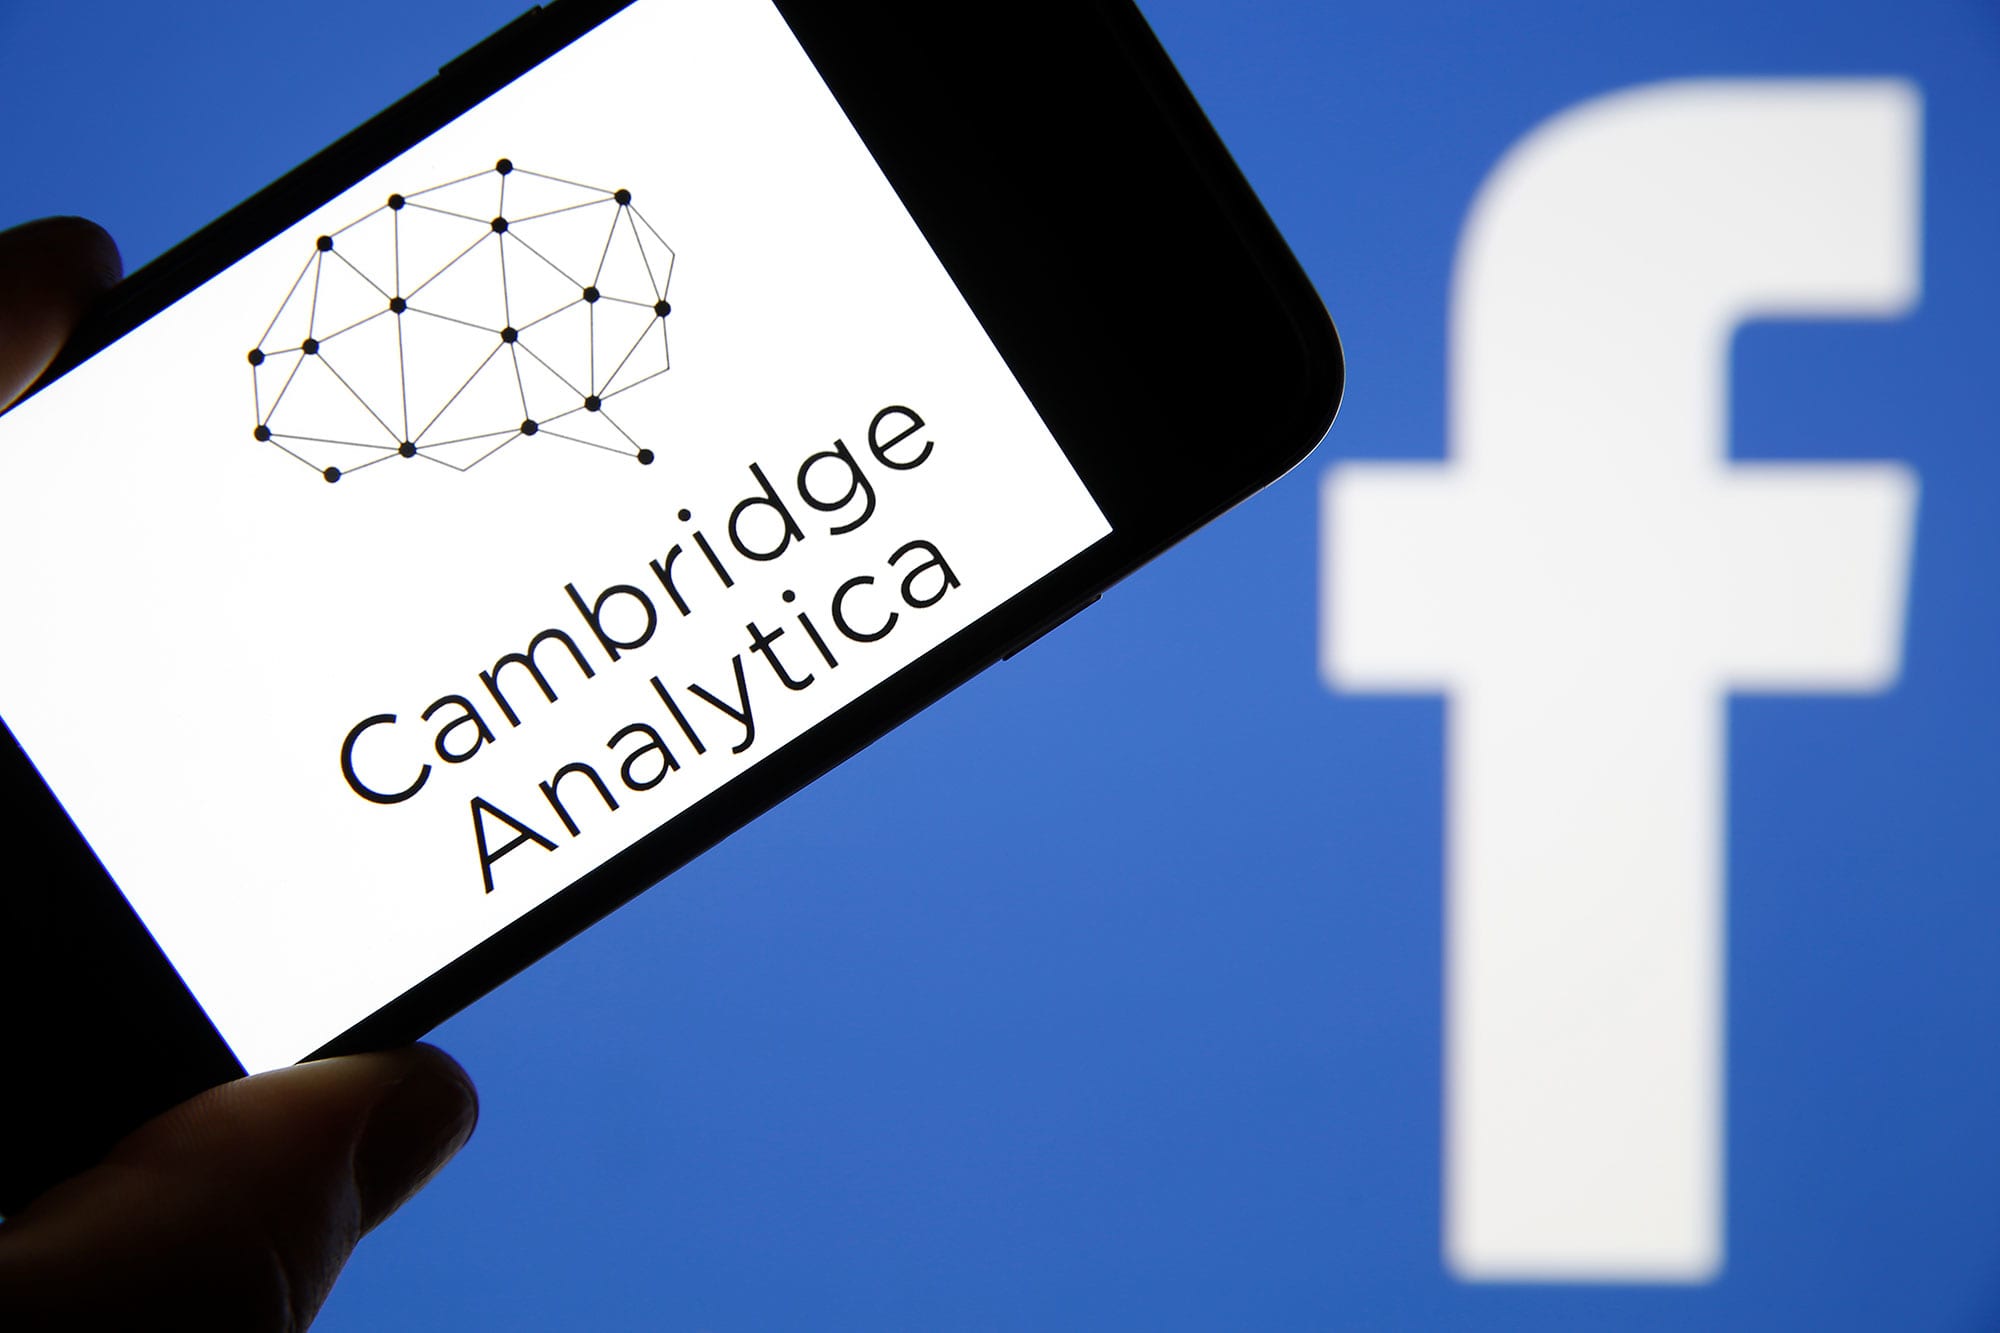 Cambridge Analytica says no more than 30 million people impacted